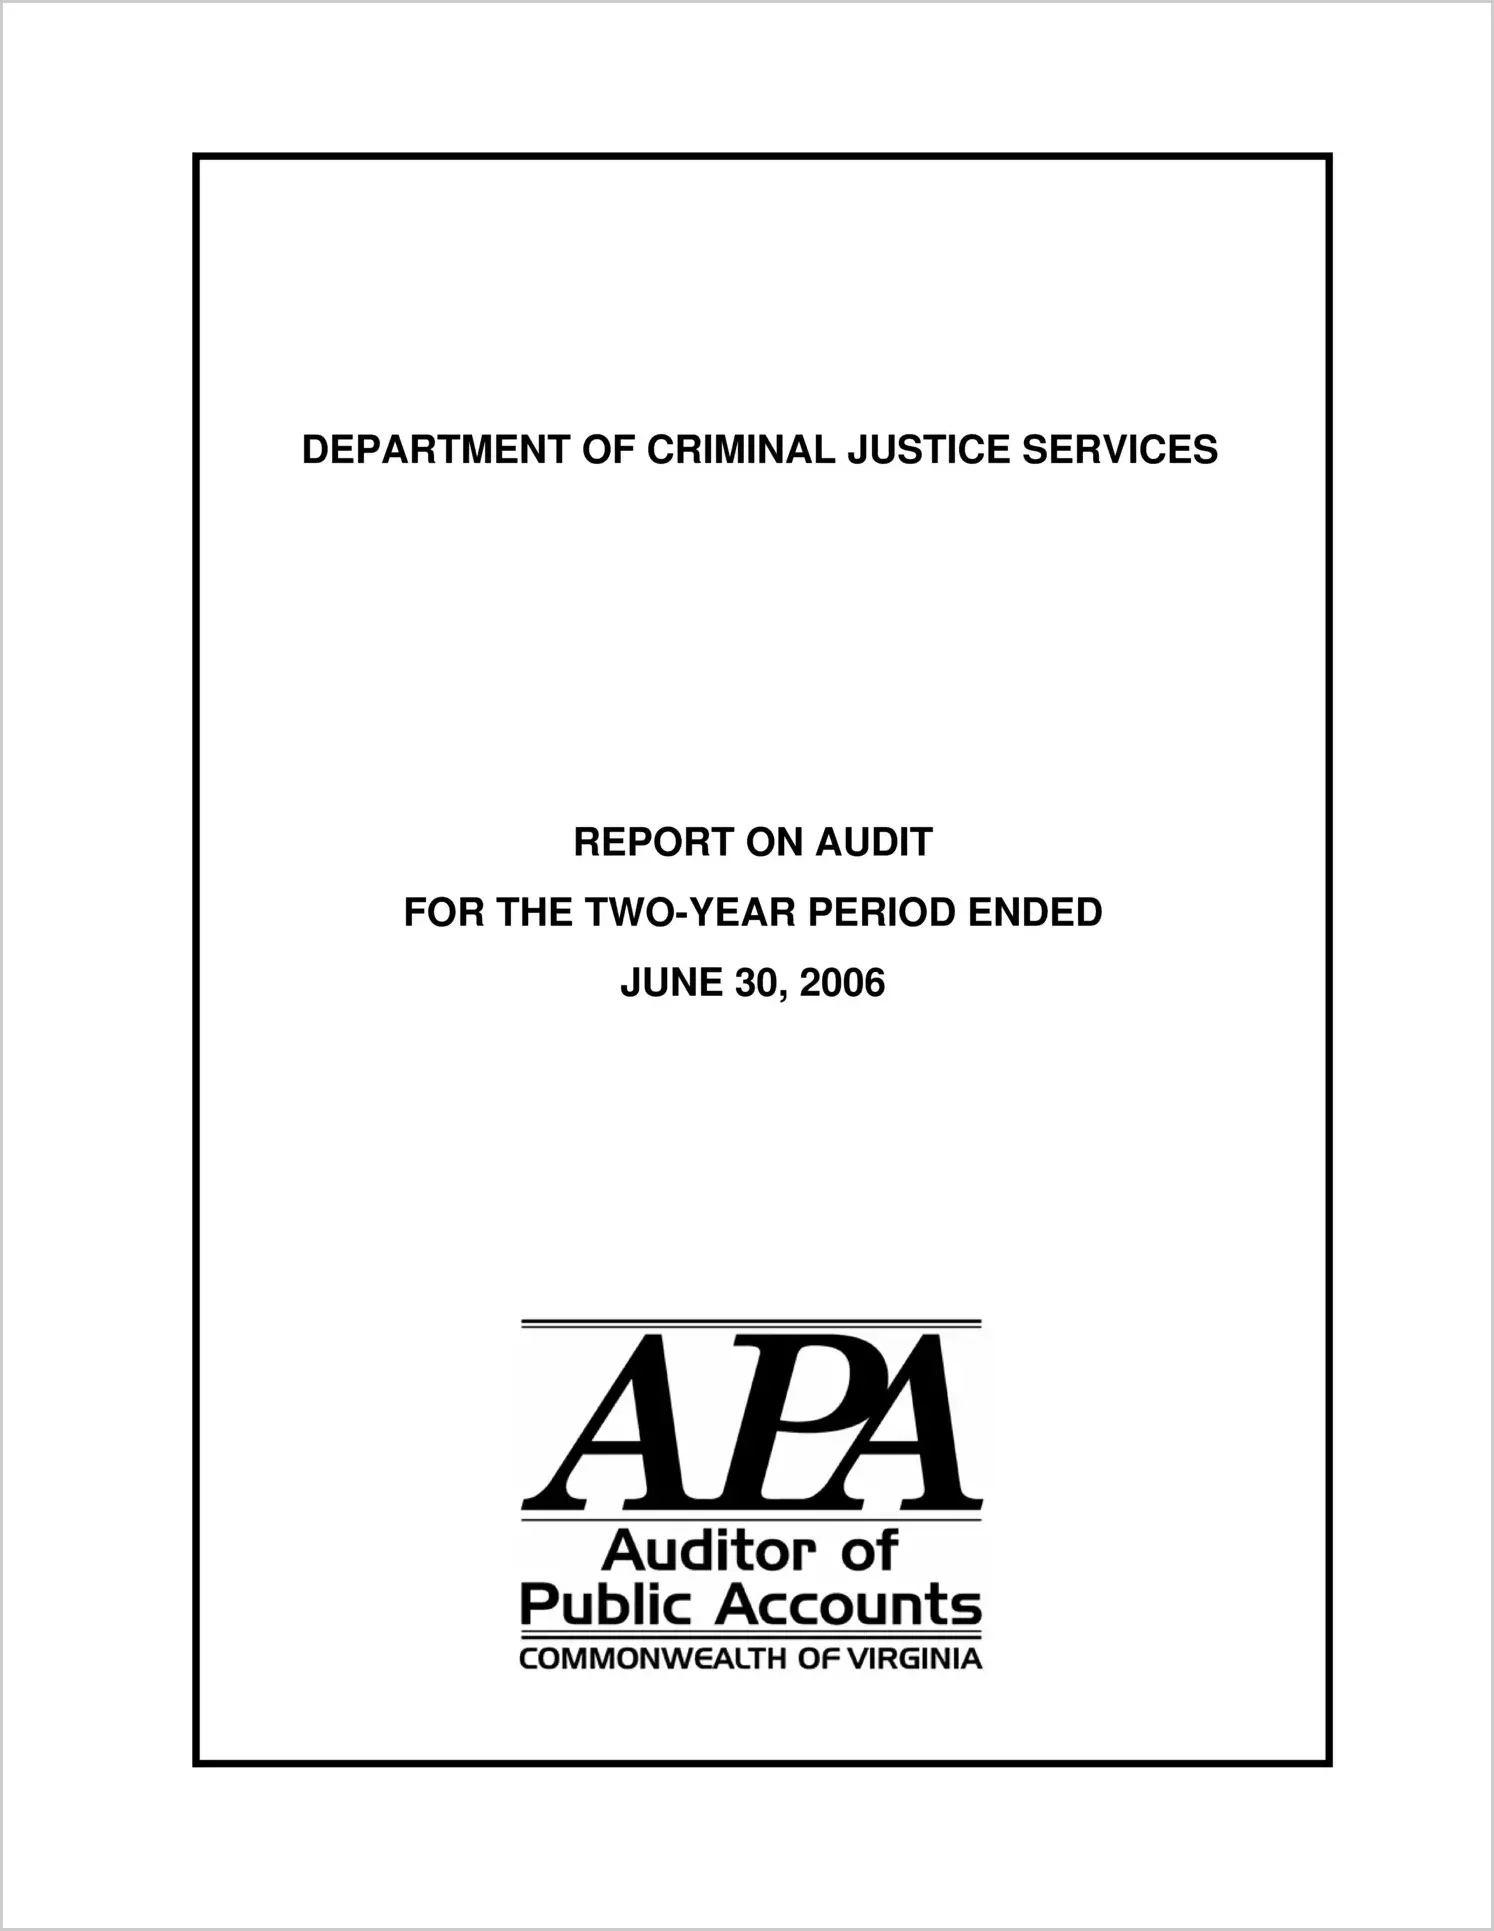 Department of Criminal Justice Services for the two-year period ended June 30, 2006